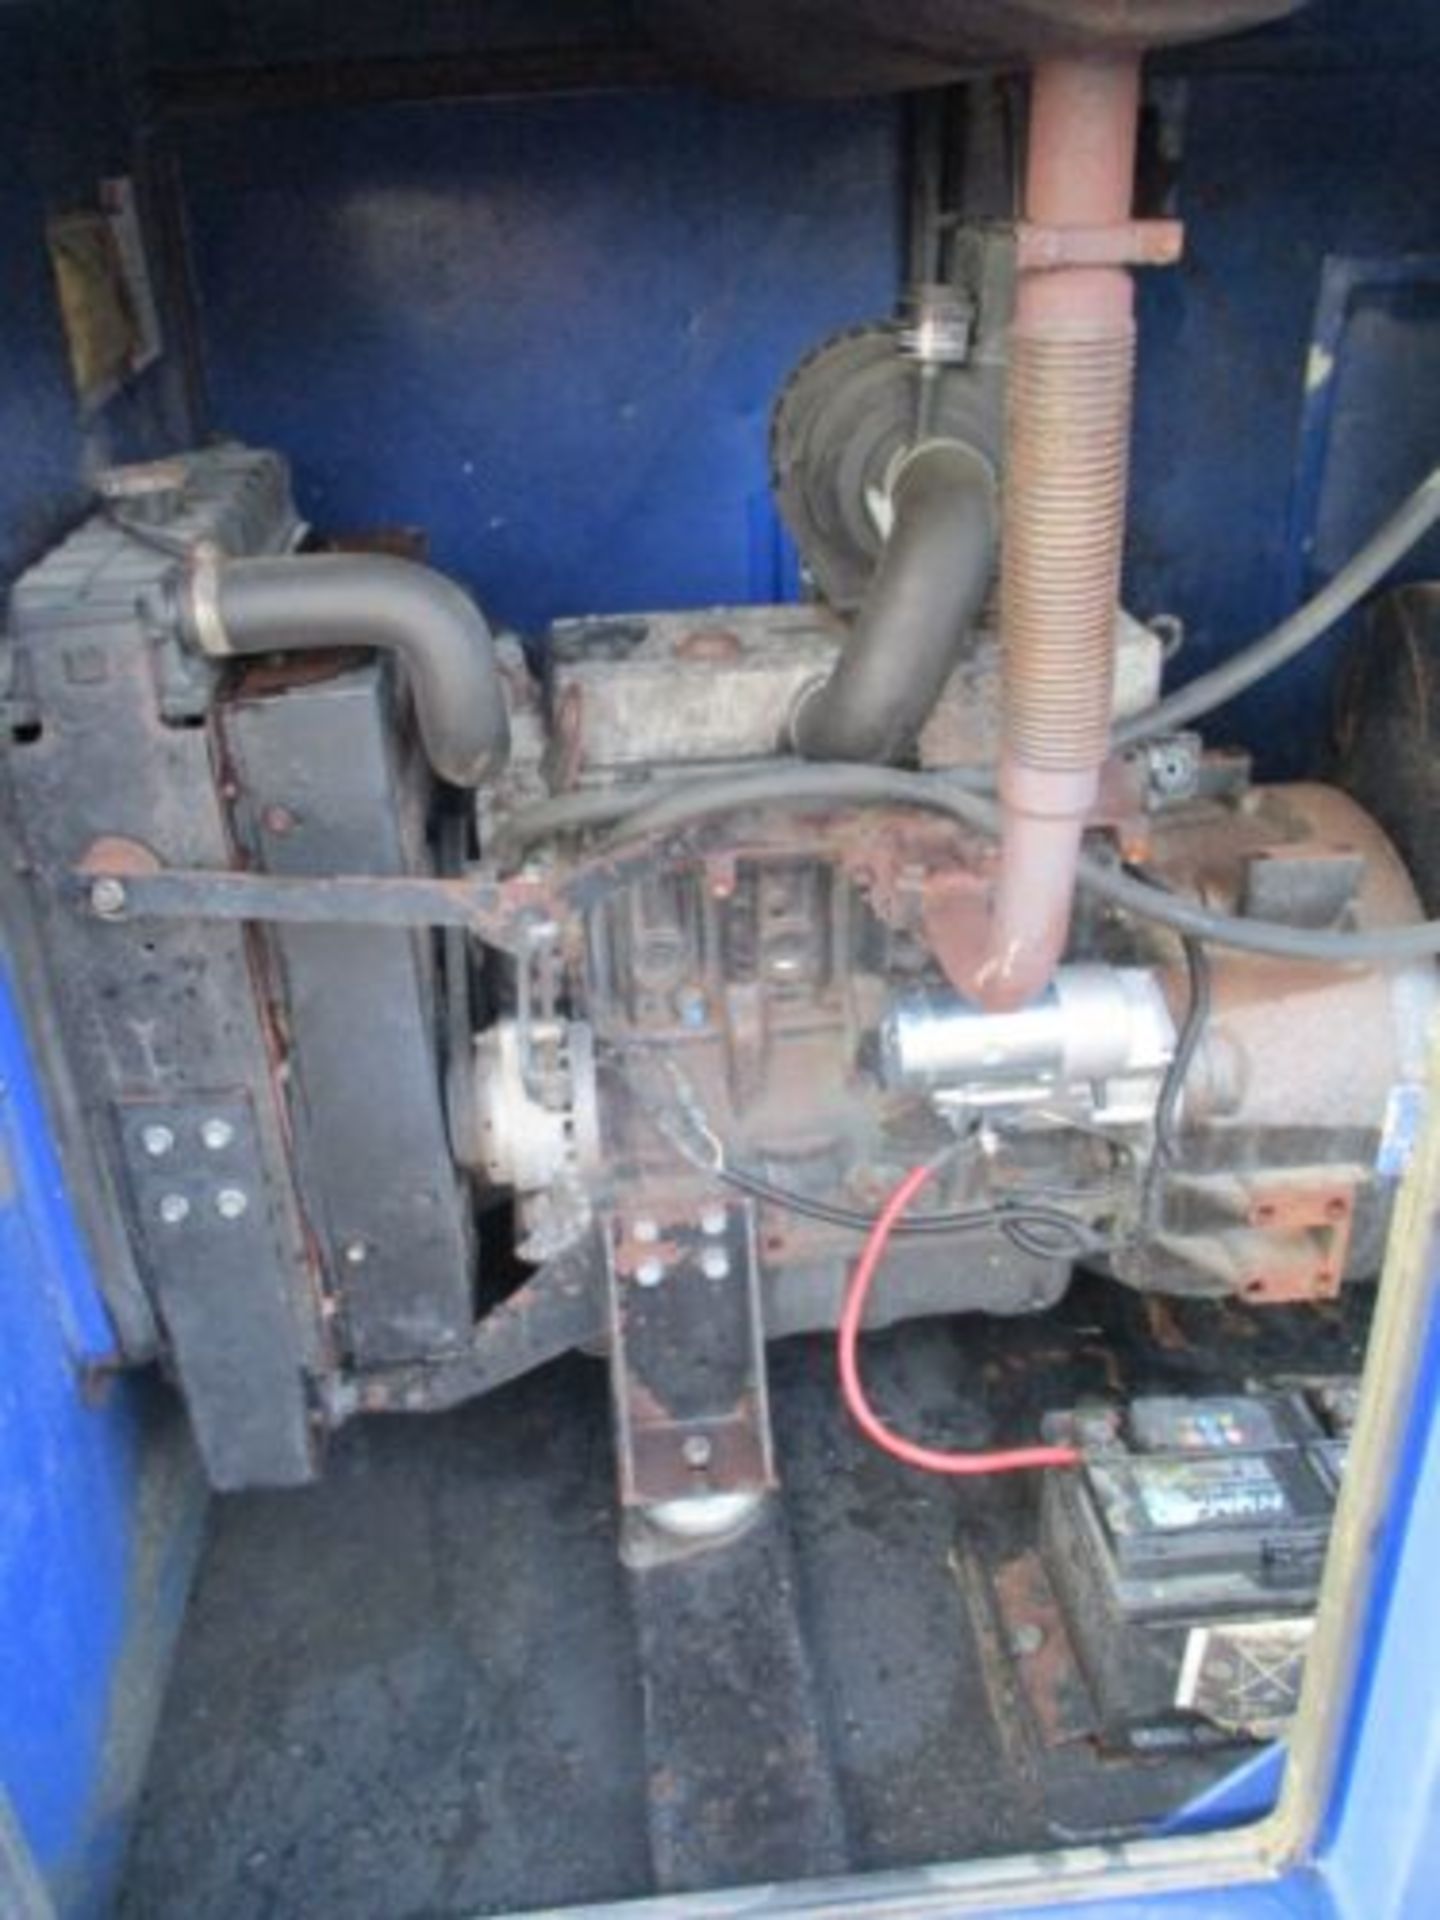 SYKES CP150 6 INCH " WATER PUMP ISUZU DIESEL ENGINE GODWIN DELIVERY ARRANGED - Image 5 of 8